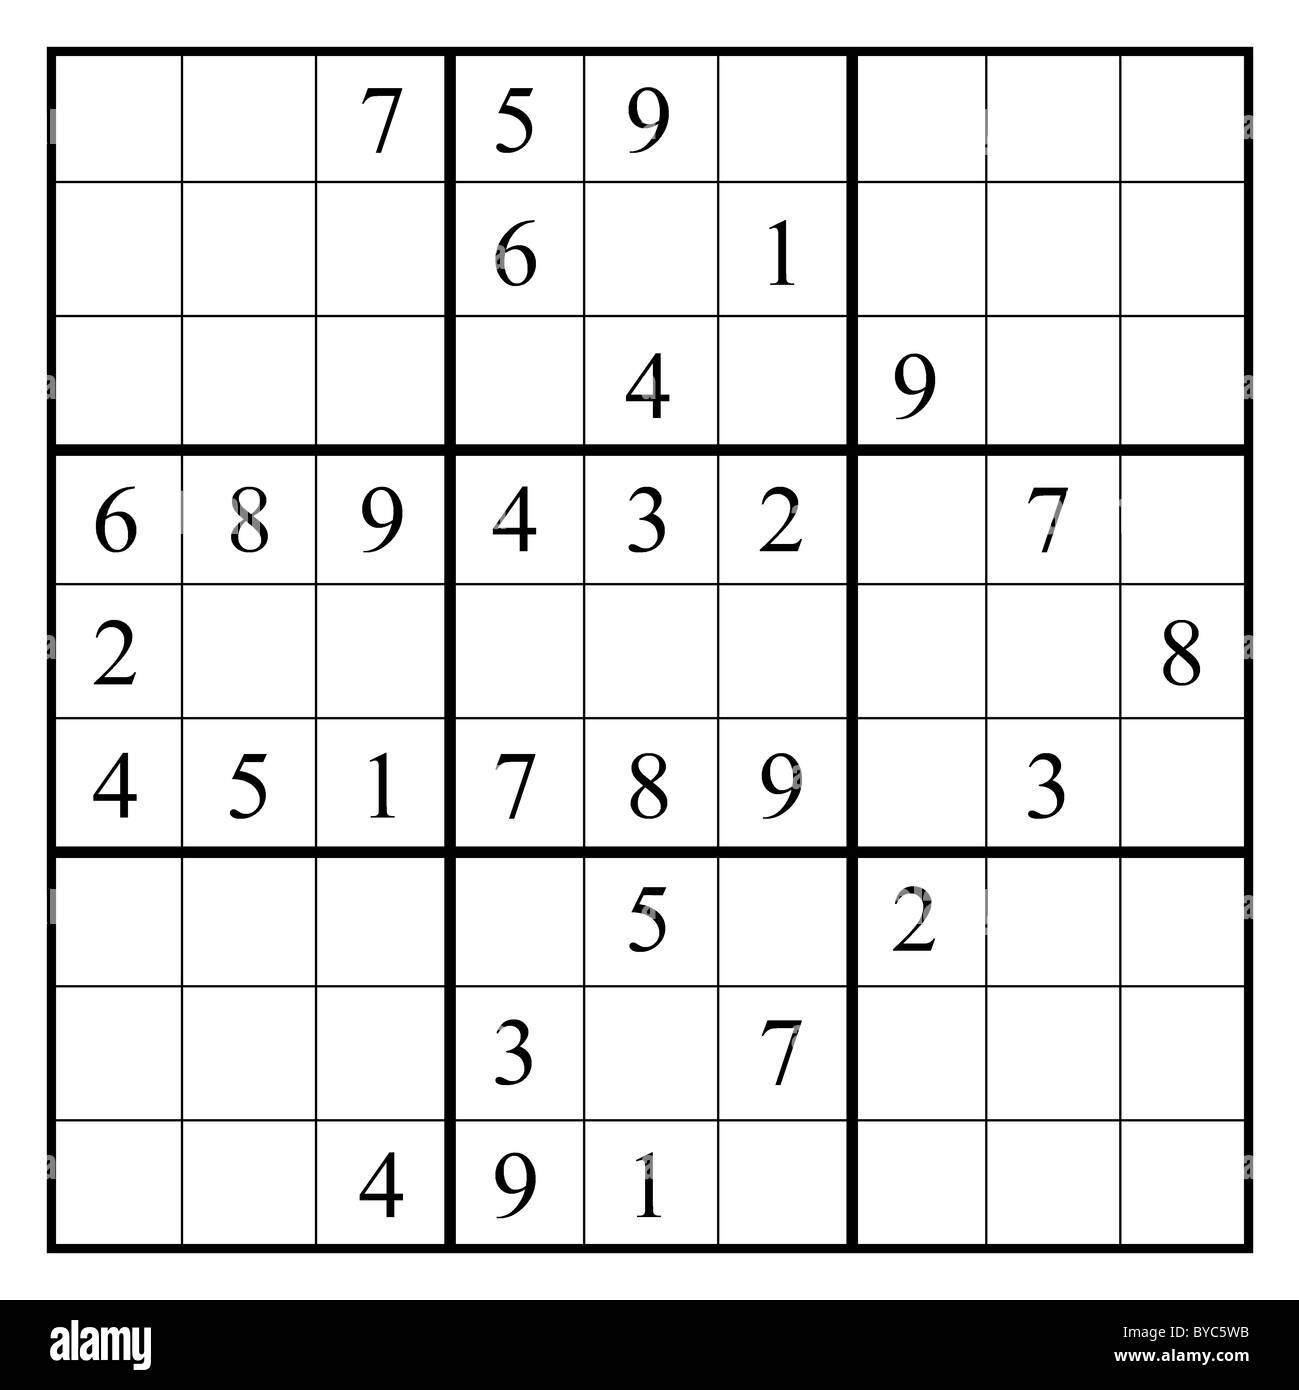 SUDOKU Puzzle Book Travel Brain Mind Challenge Number Hard Easy IQ Test Solution 